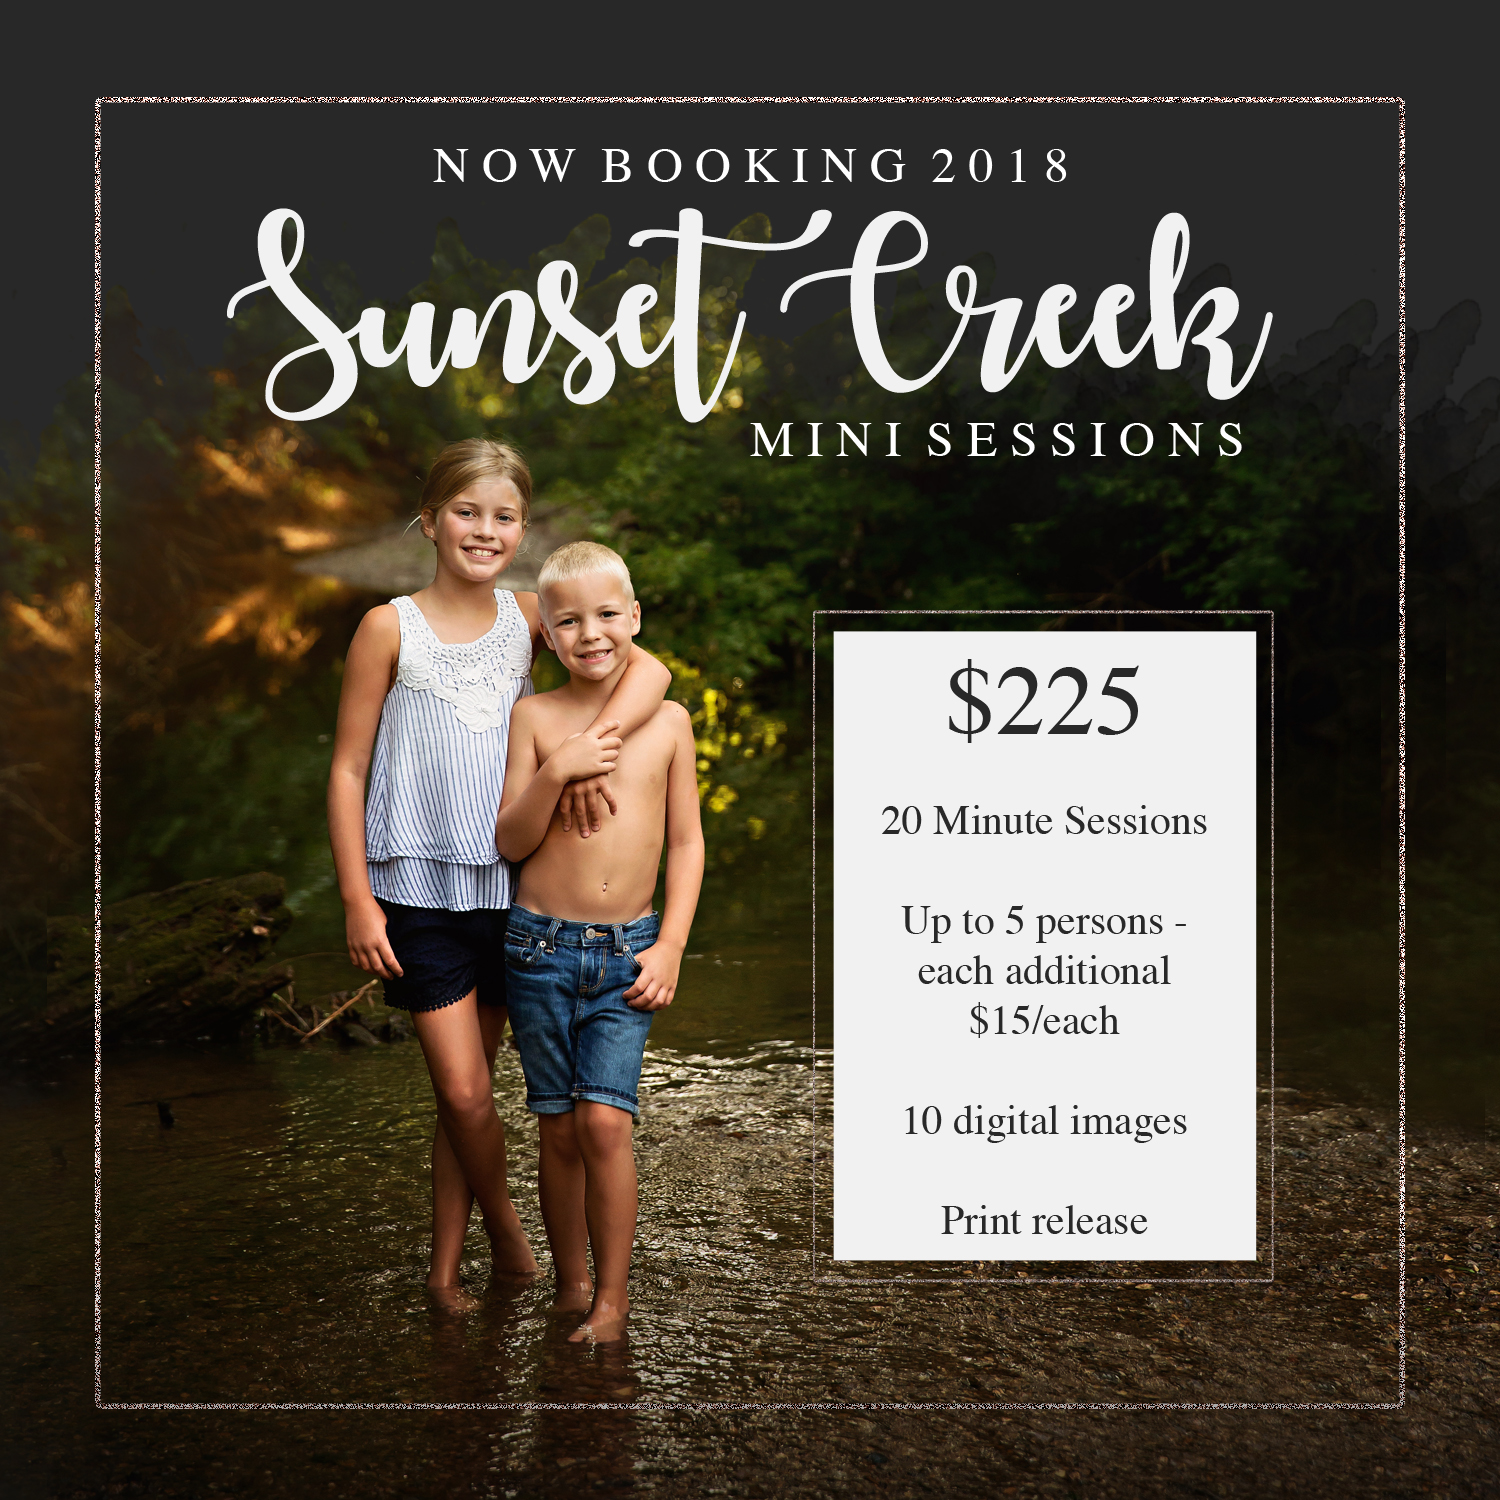 Additional Openings for 2018 Sunset Creek Mini Sessions